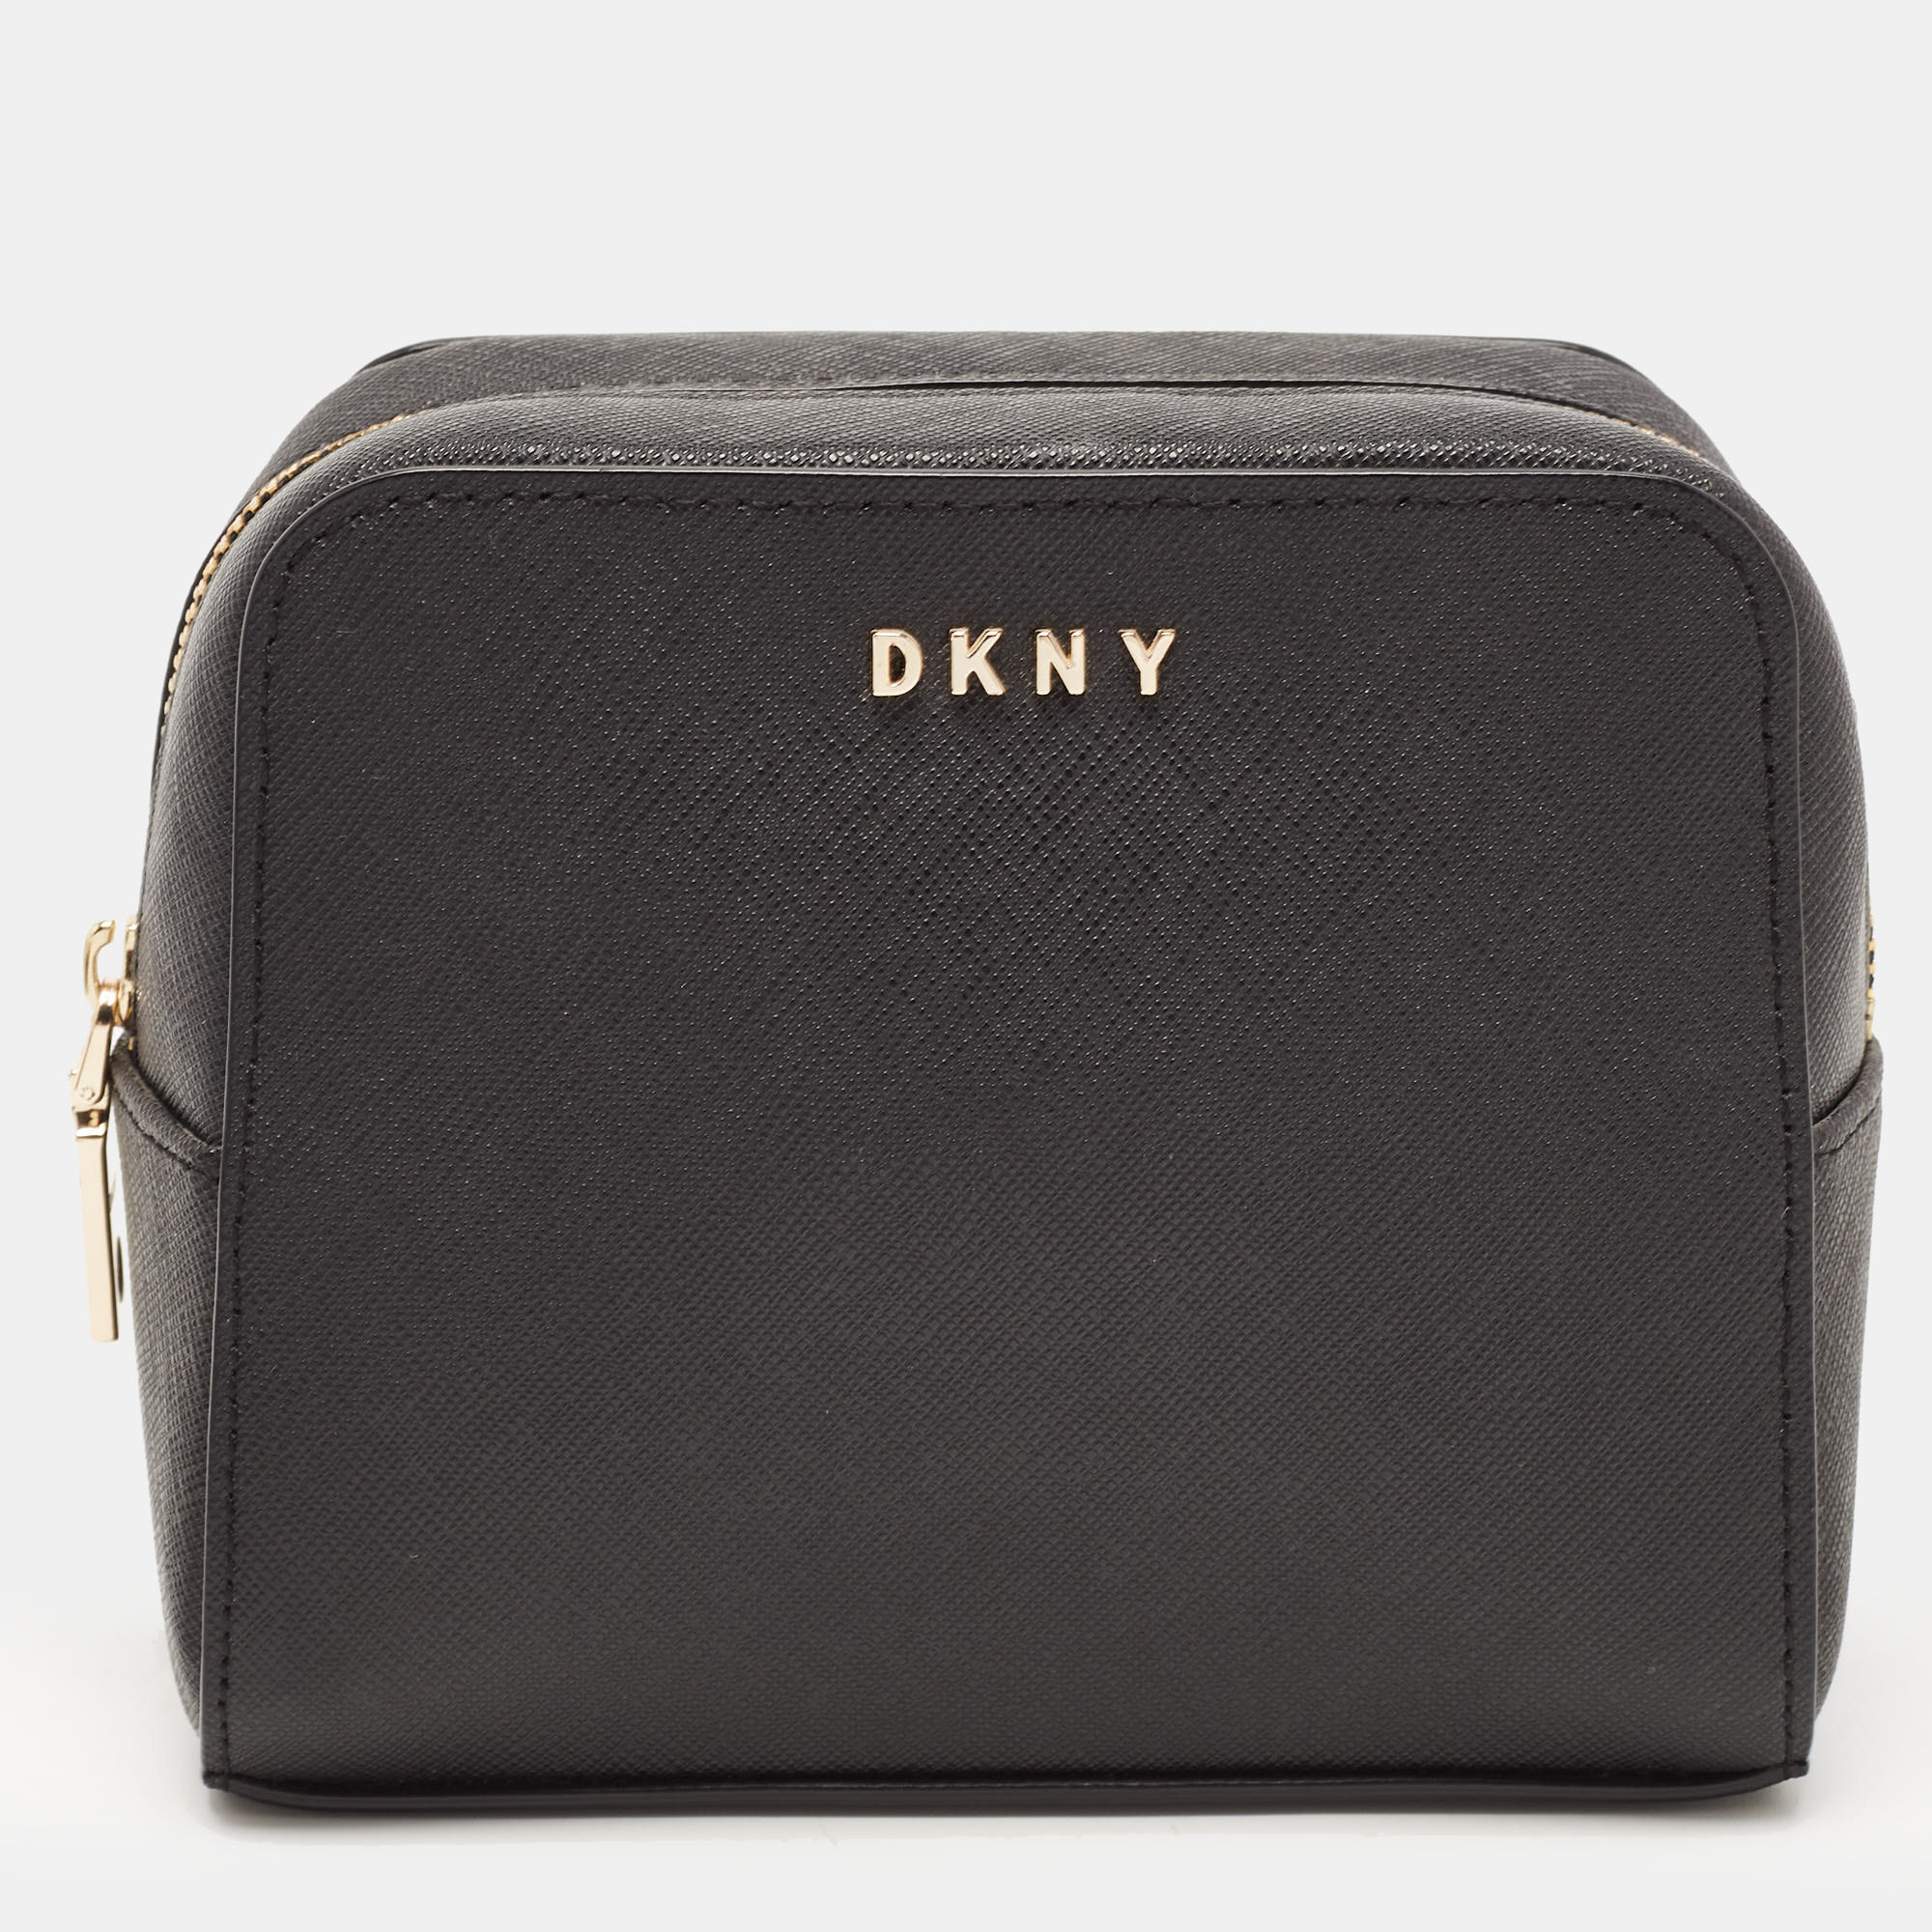 Pre-owned Dkny Black Saffiano Leather Cosmetic Pouch